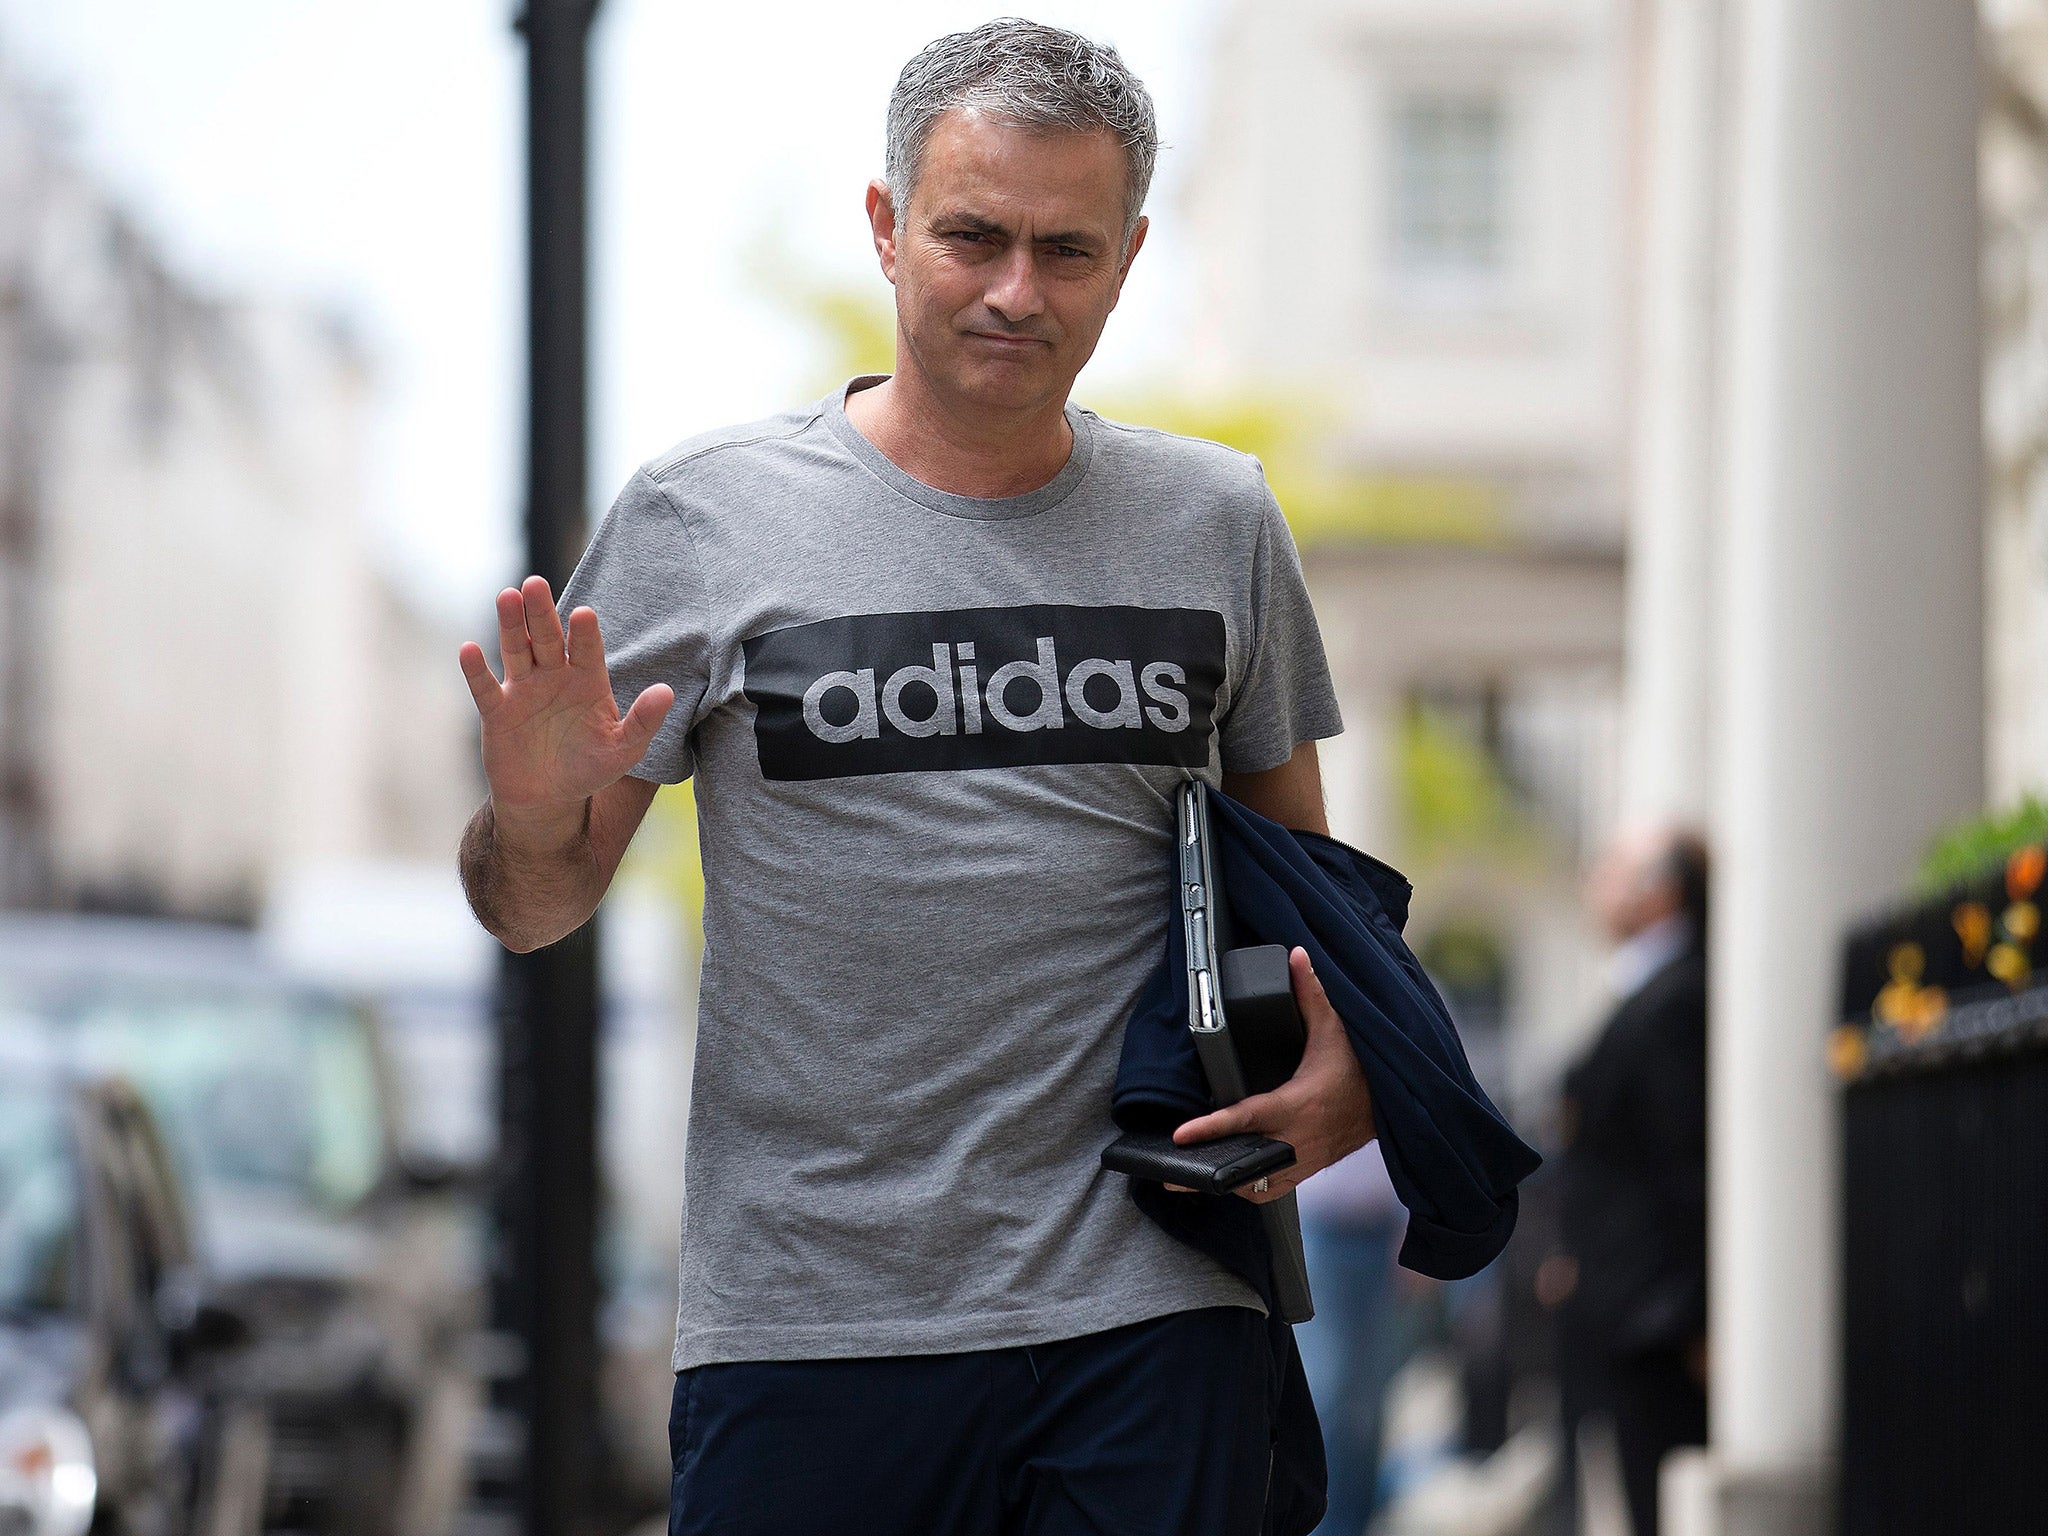 Jose Mourinho walks along a London street towards his home after being named Manchester United manager